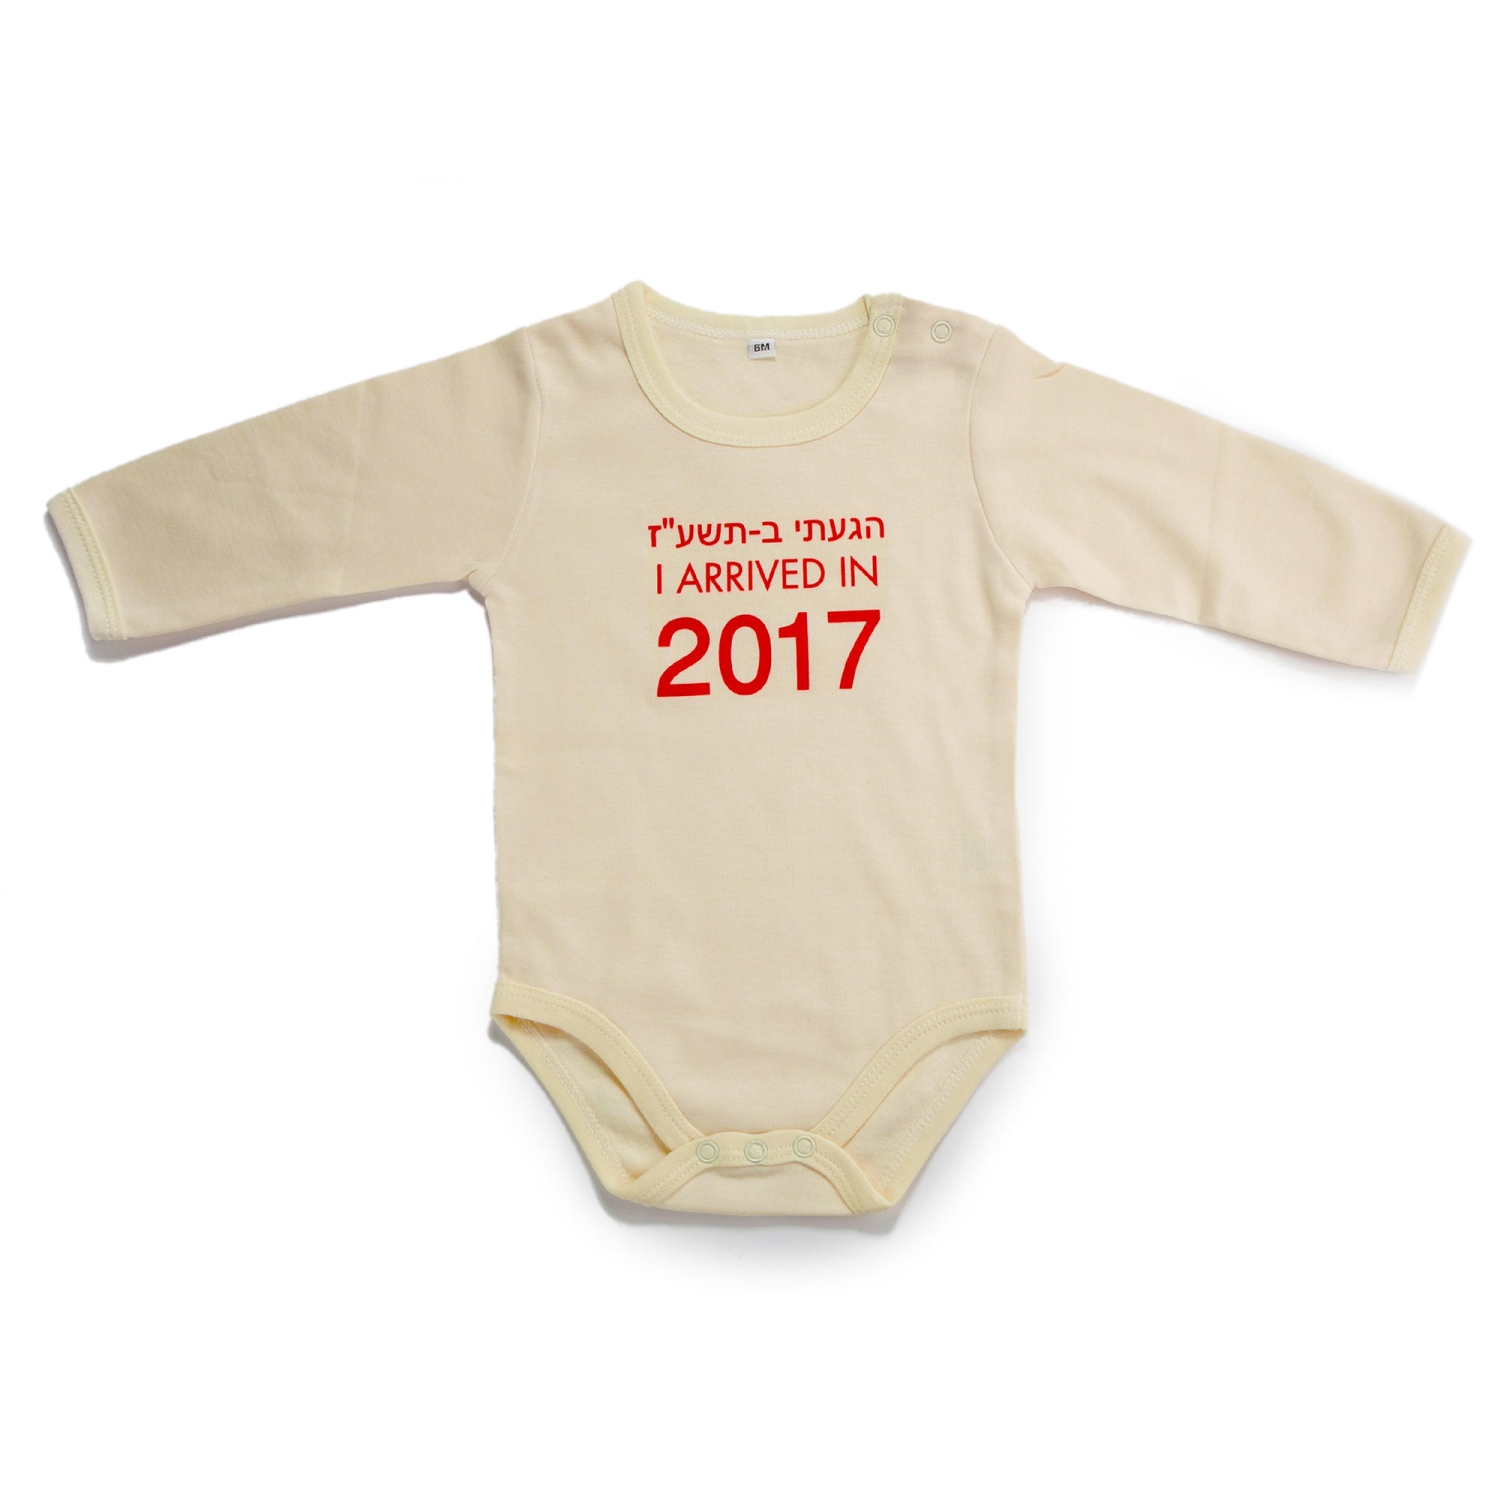 Barbara Shaw Onesie - I Arrived in 2017 (Choice of Colors) - 1